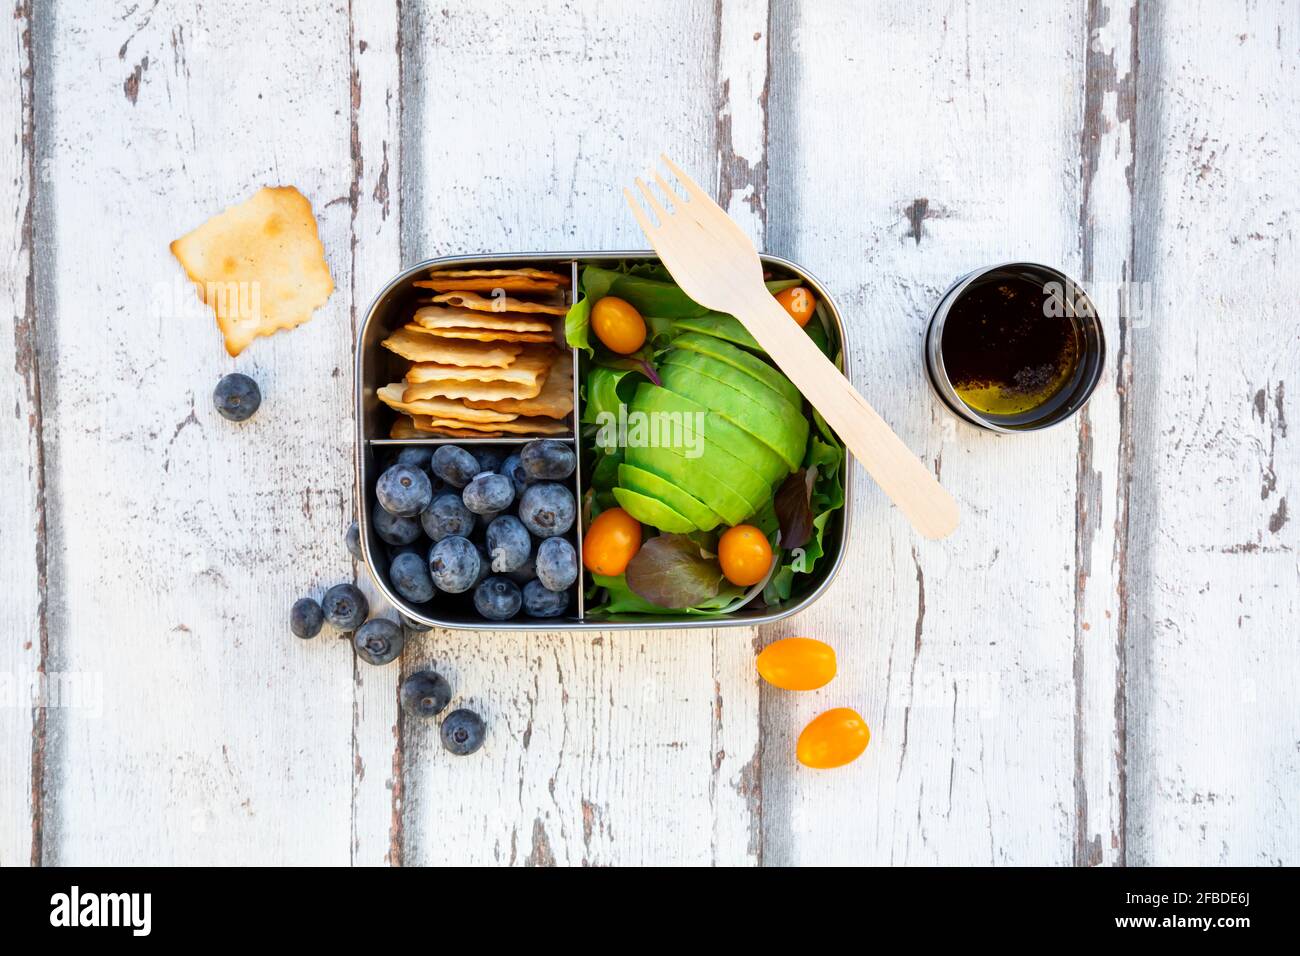 Lunchbox with salad, avocado and yellow tomatoes, crackers, blueberries and salad dressing Stock Photo